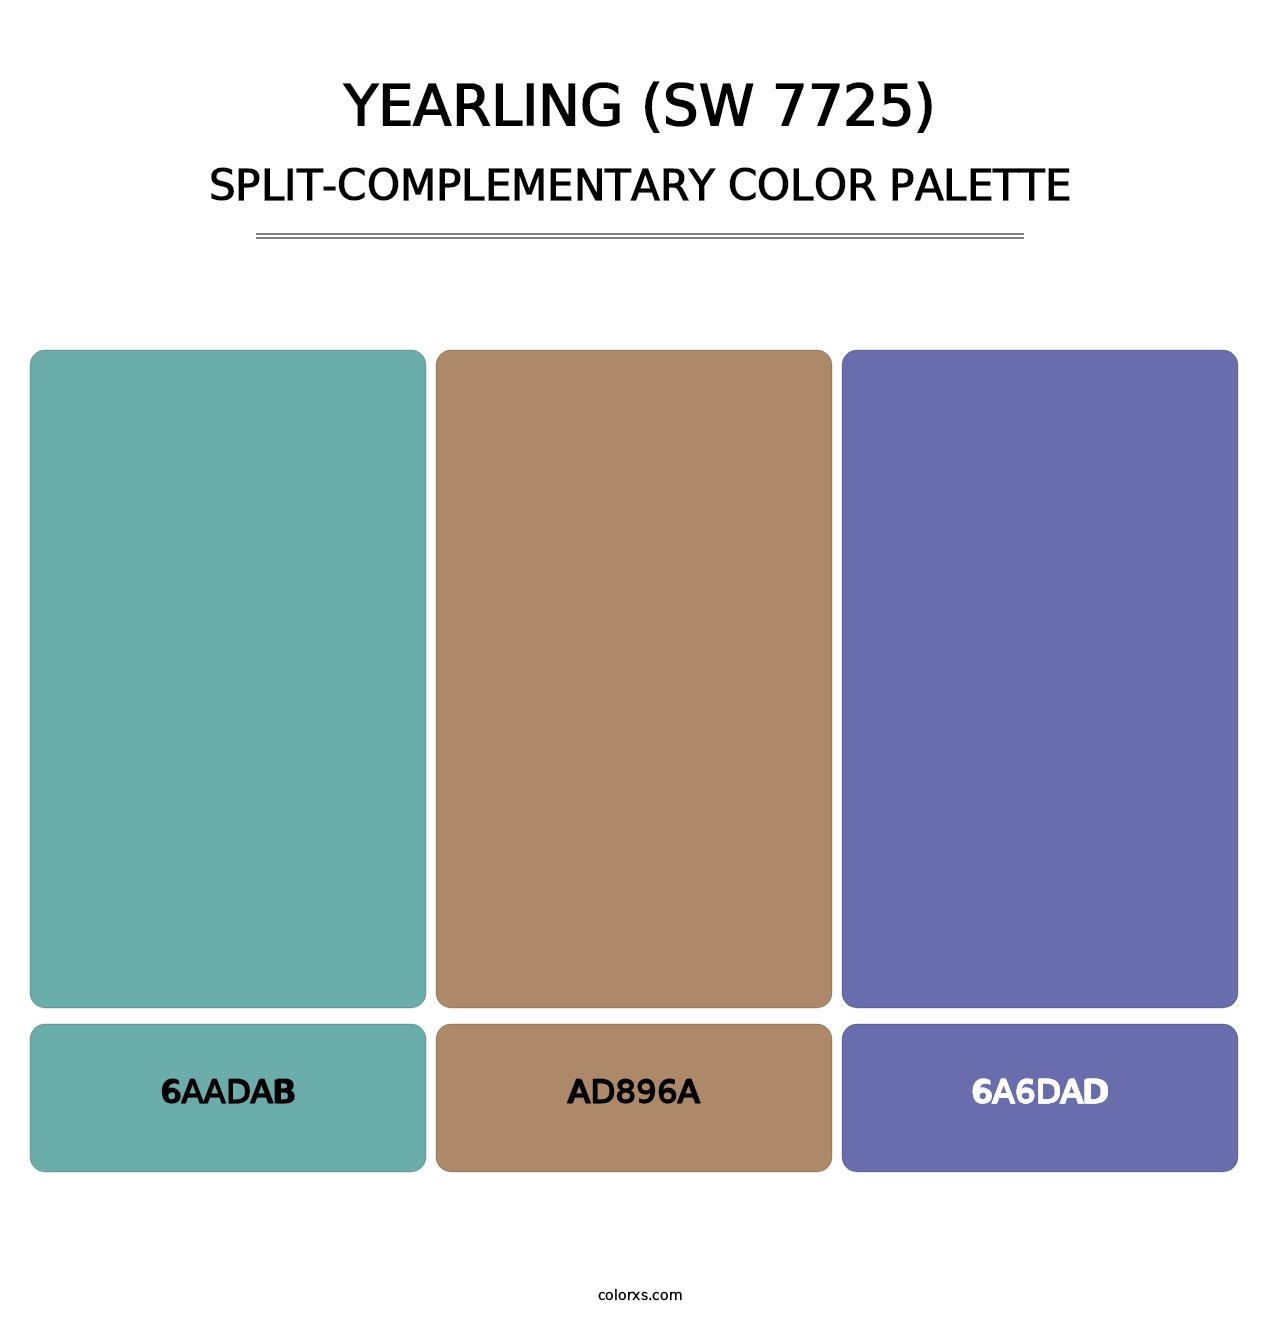 Yearling (SW 7725) - Split-Complementary Color Palette